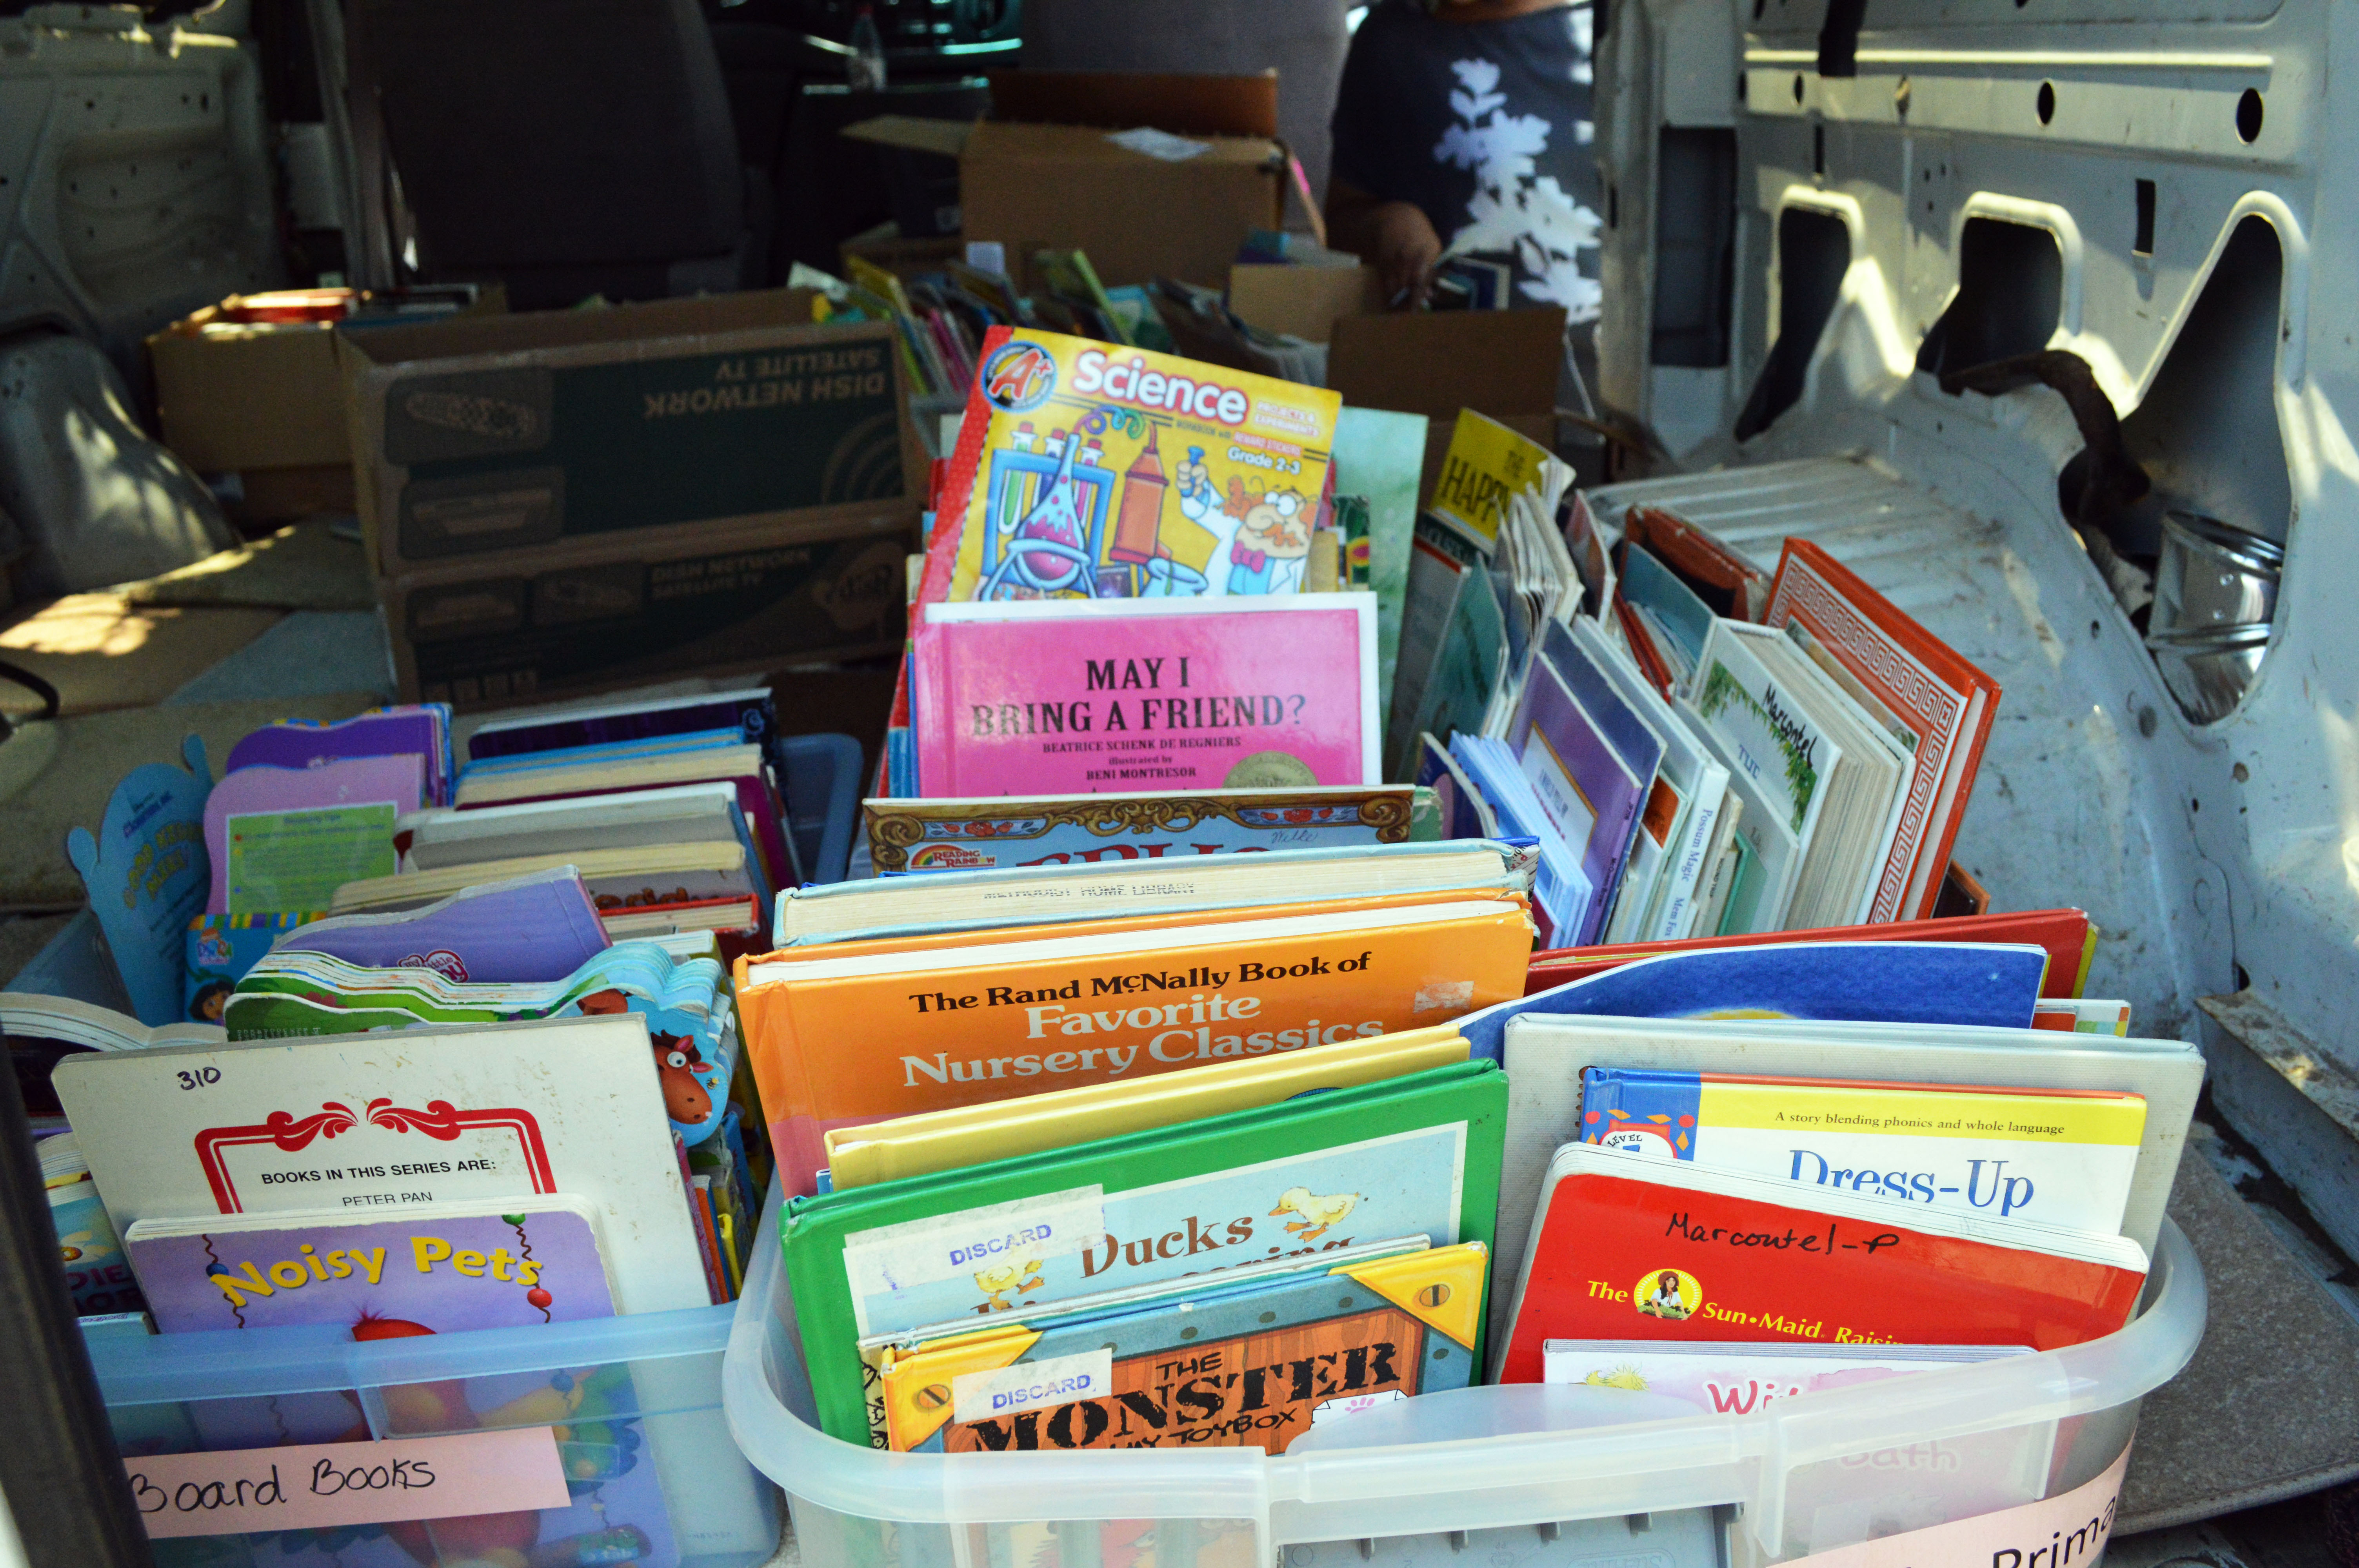 The Bookmobile provided free books to kids throughout the summer at the Summer Meals site in Brame Park.